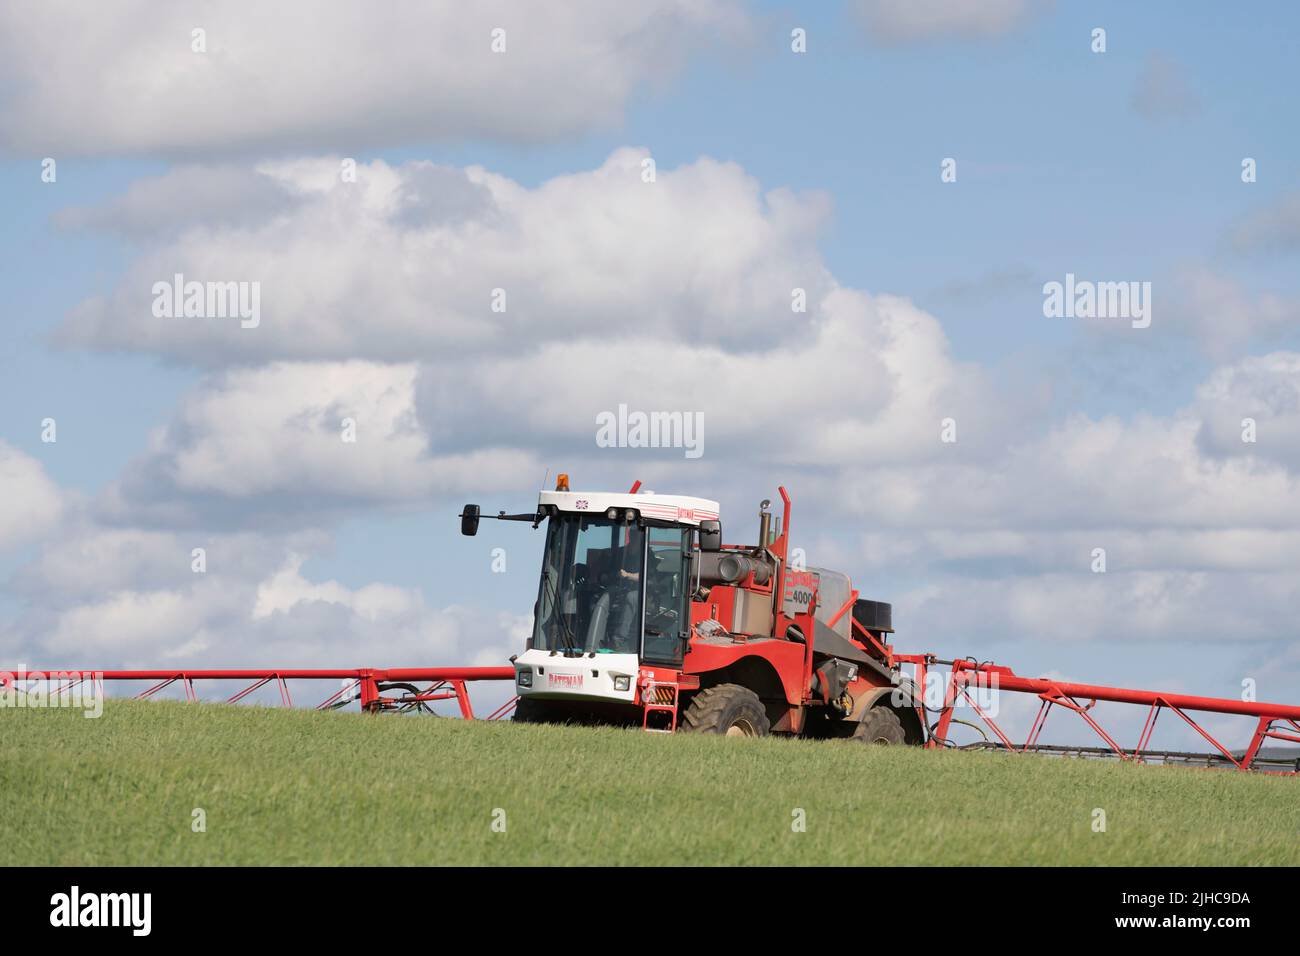 A Self Propelled Bateman 4000 Crop Sprayer In Action on a Sunny Morning in Summer in a Field of Barley Stock Photo